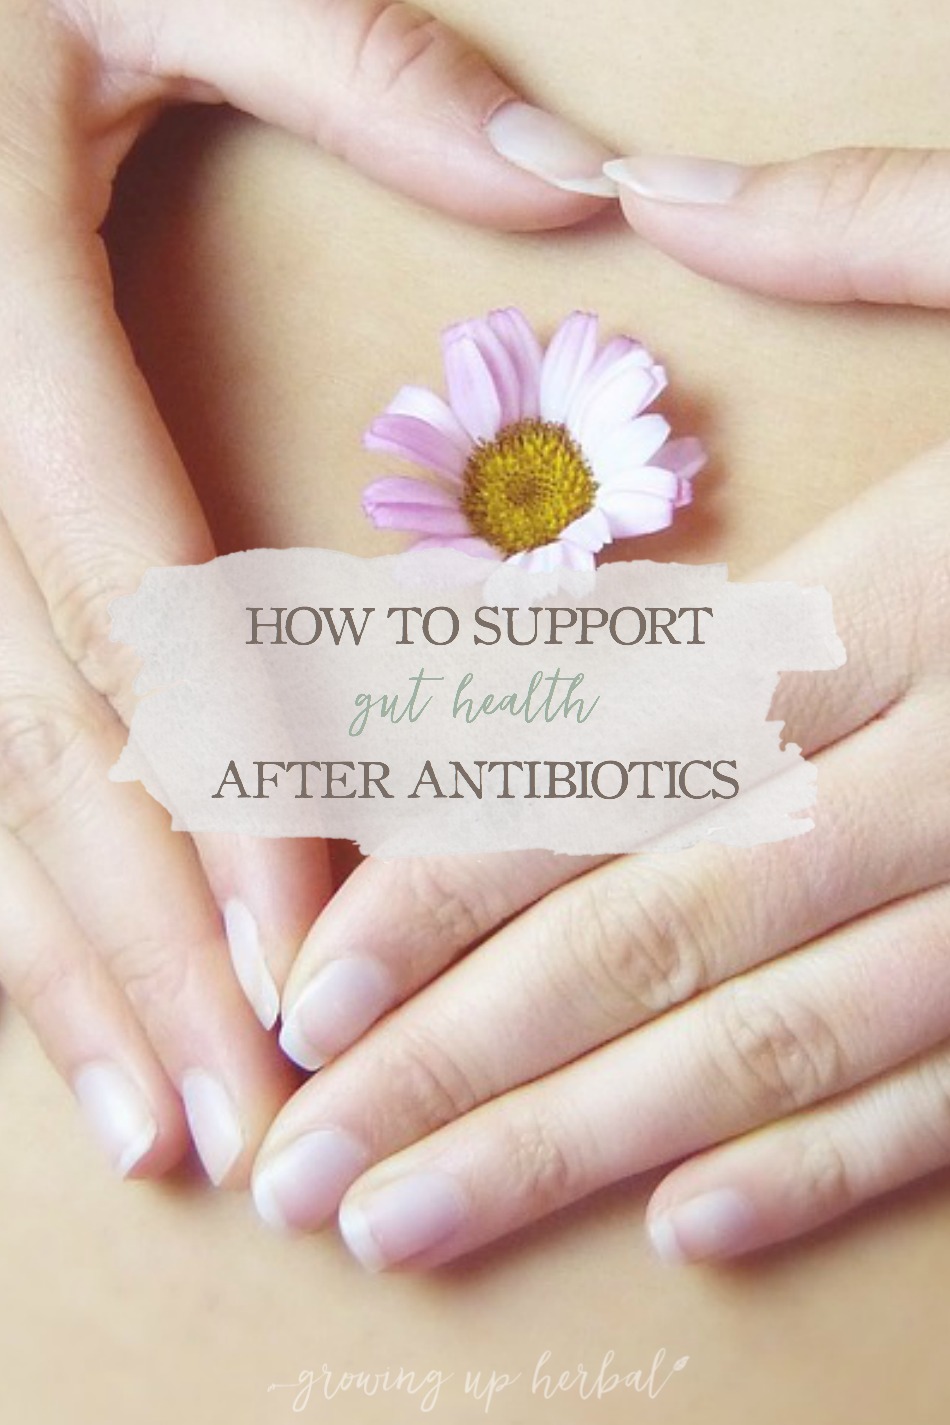 How To Support Gut Health After Antibiotics | Growing Up Herbal | If you’re wondering how to support gut health after needing a round or two of antibiotics, this post will explore some of the best options.